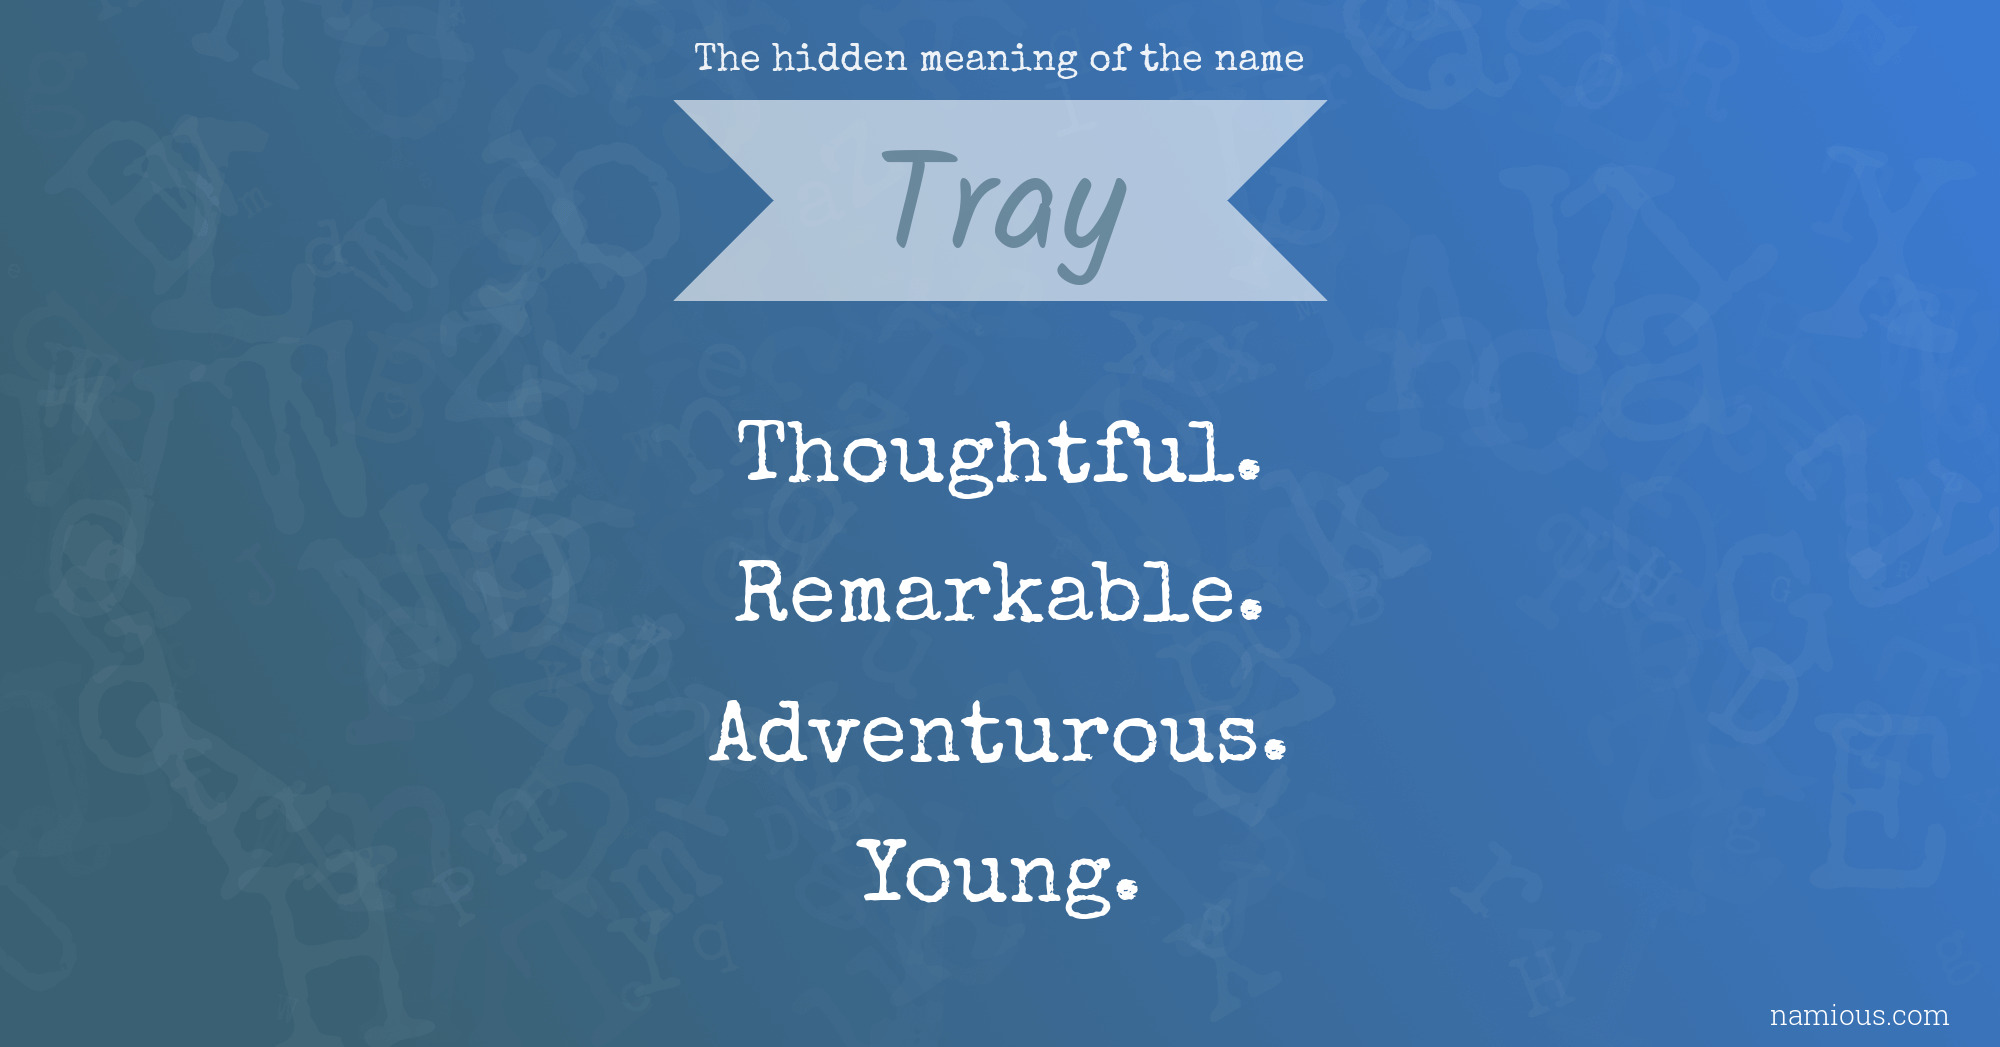 The hidden meaning of the name Tray